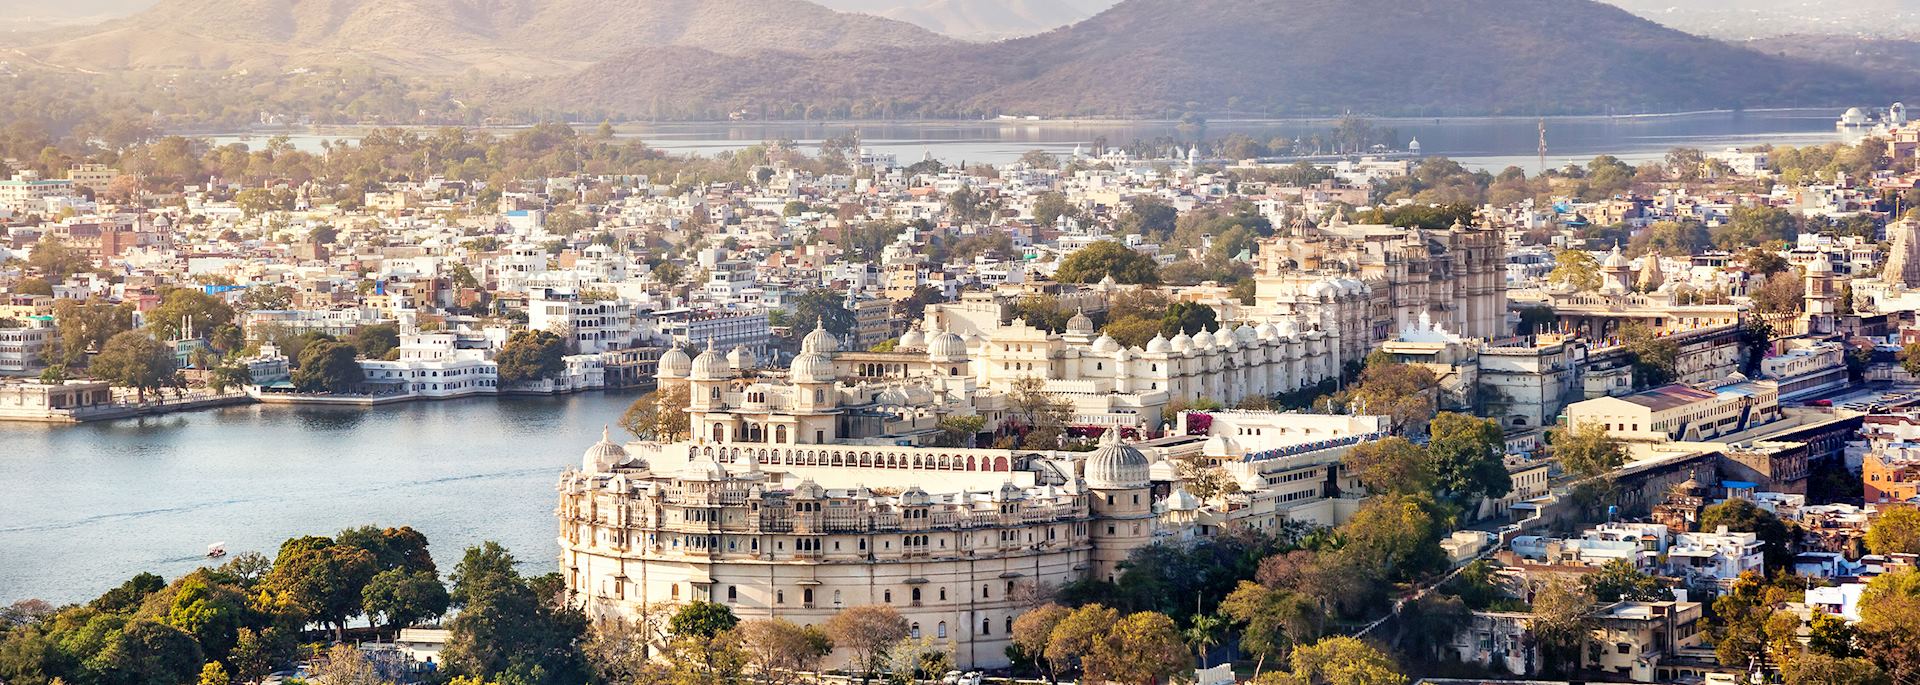 Lake Pichola with City Palace view, Udaipur